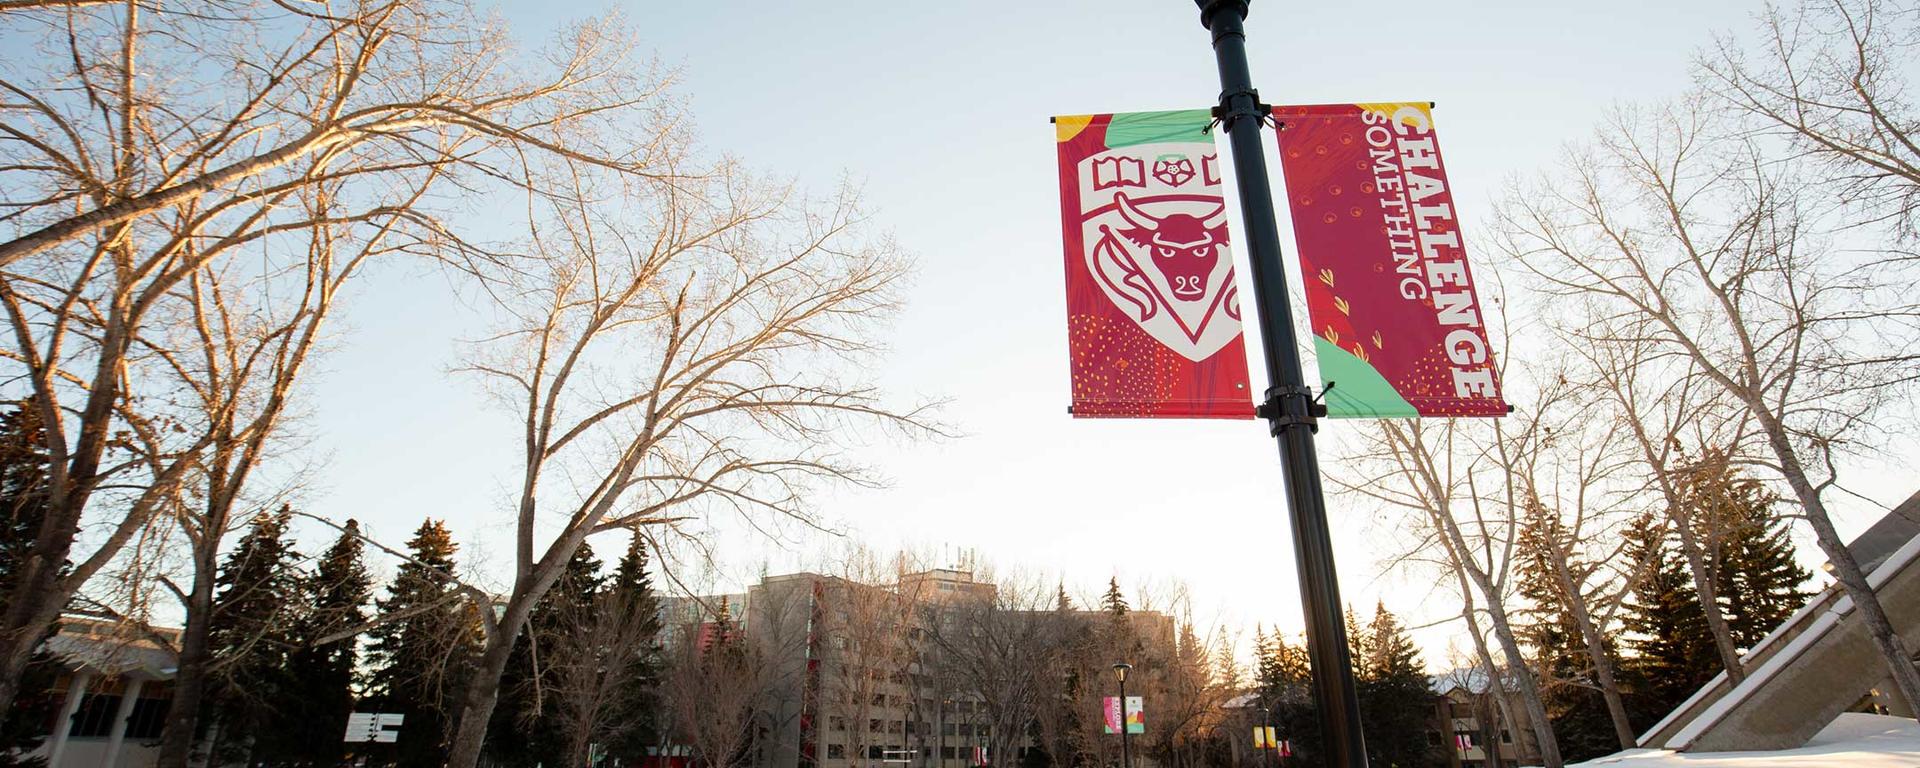 Campus flags hang in the foreground of a snowy winer scene